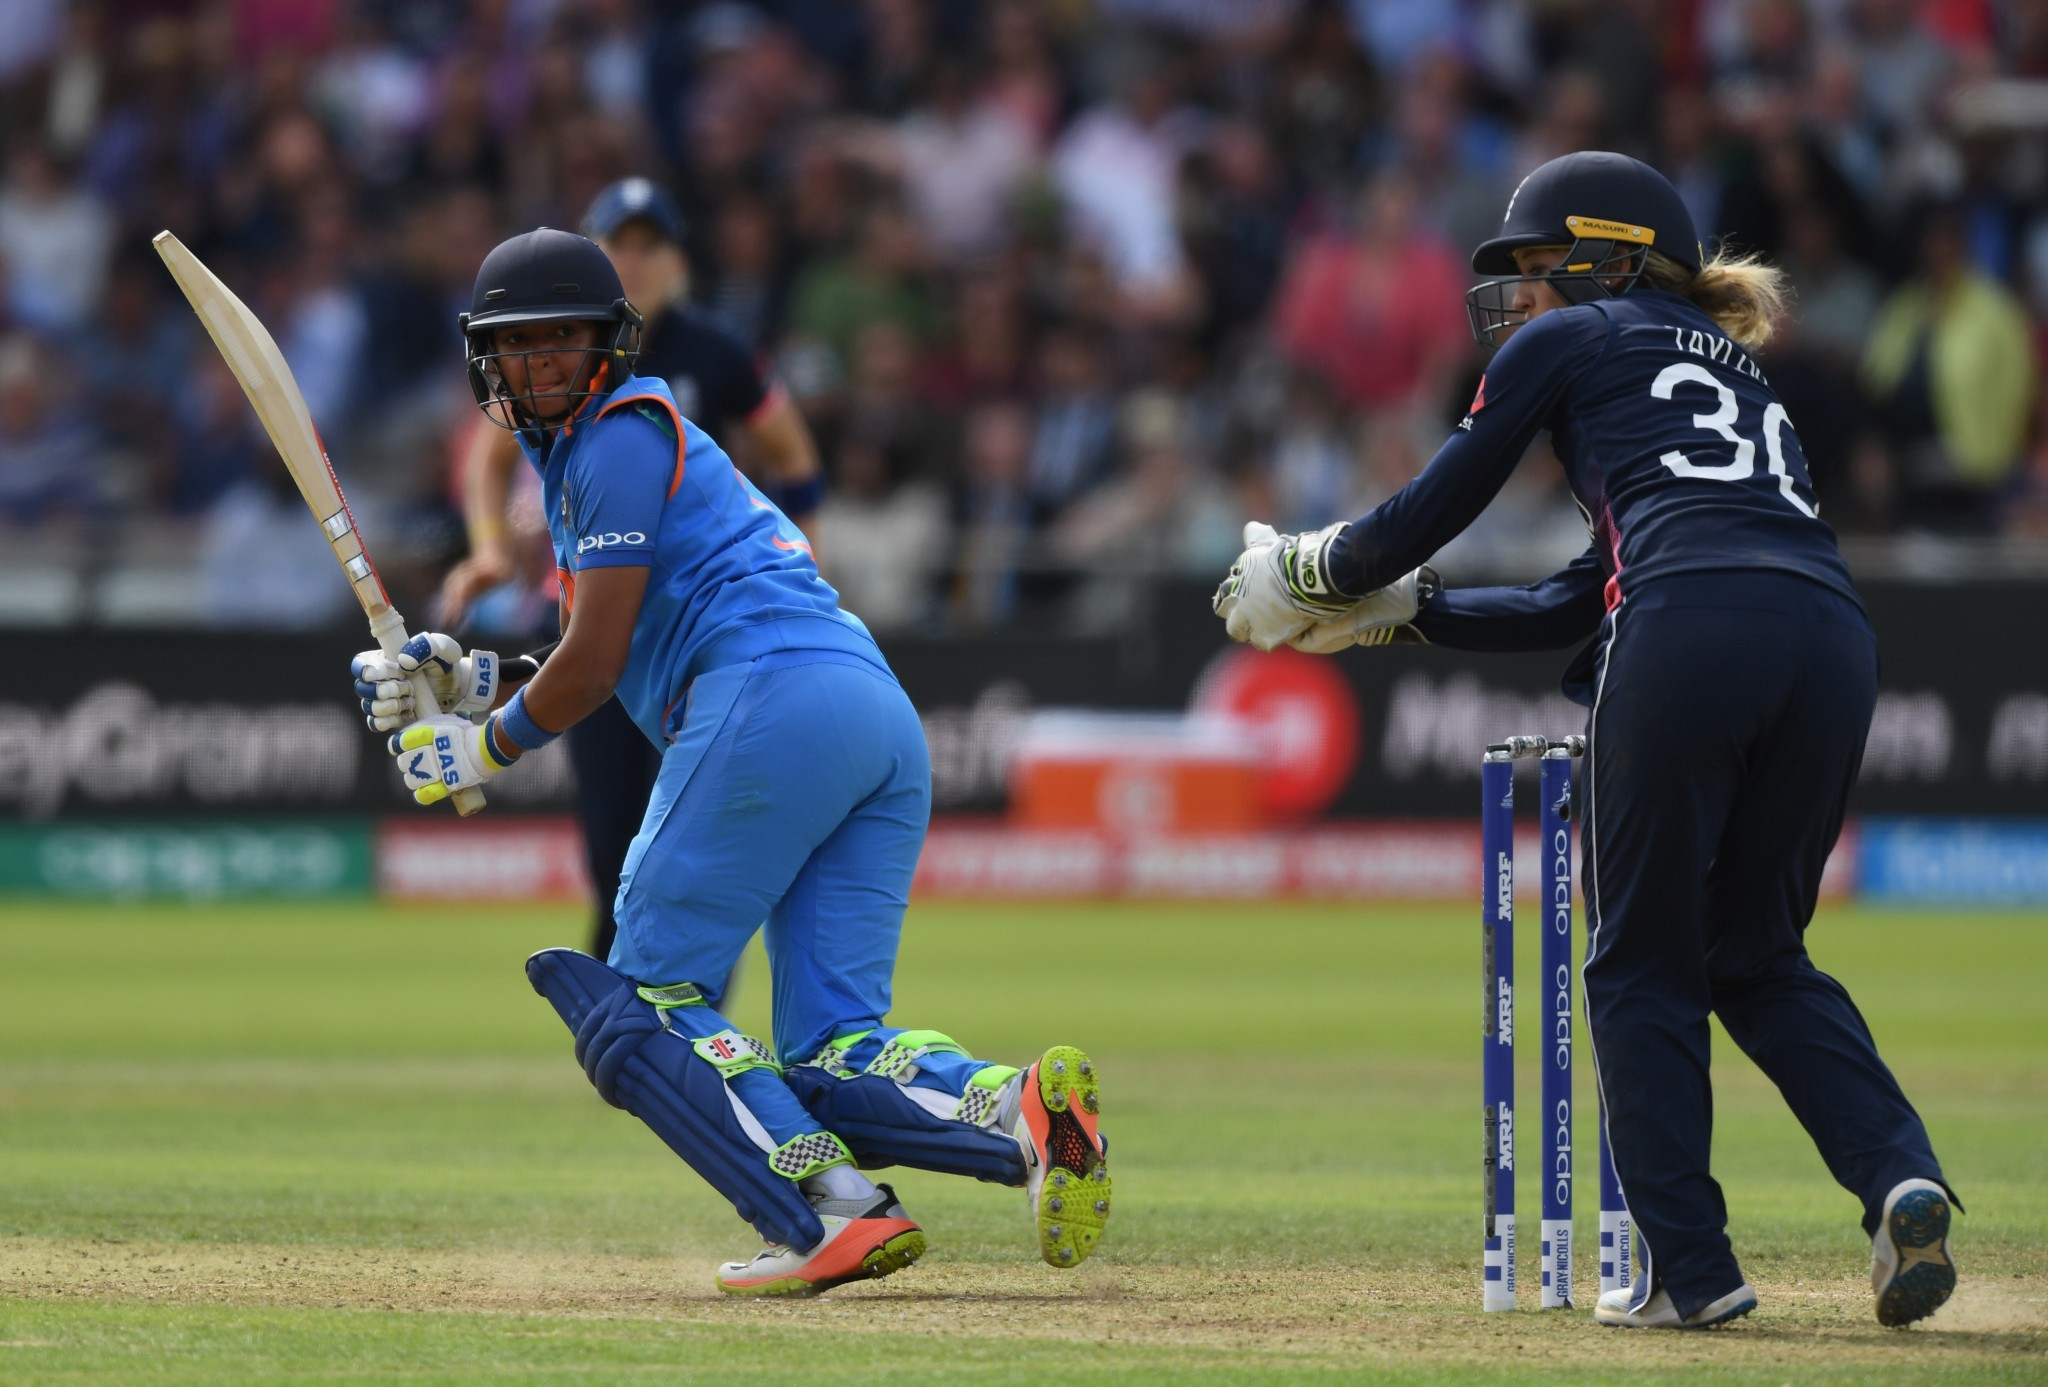 Women's cricket was exepcted to be part of the Commonwealth Games programme in 2022 but is now set not to appear whether Birmingham or Liverpool host it ©Getty Images